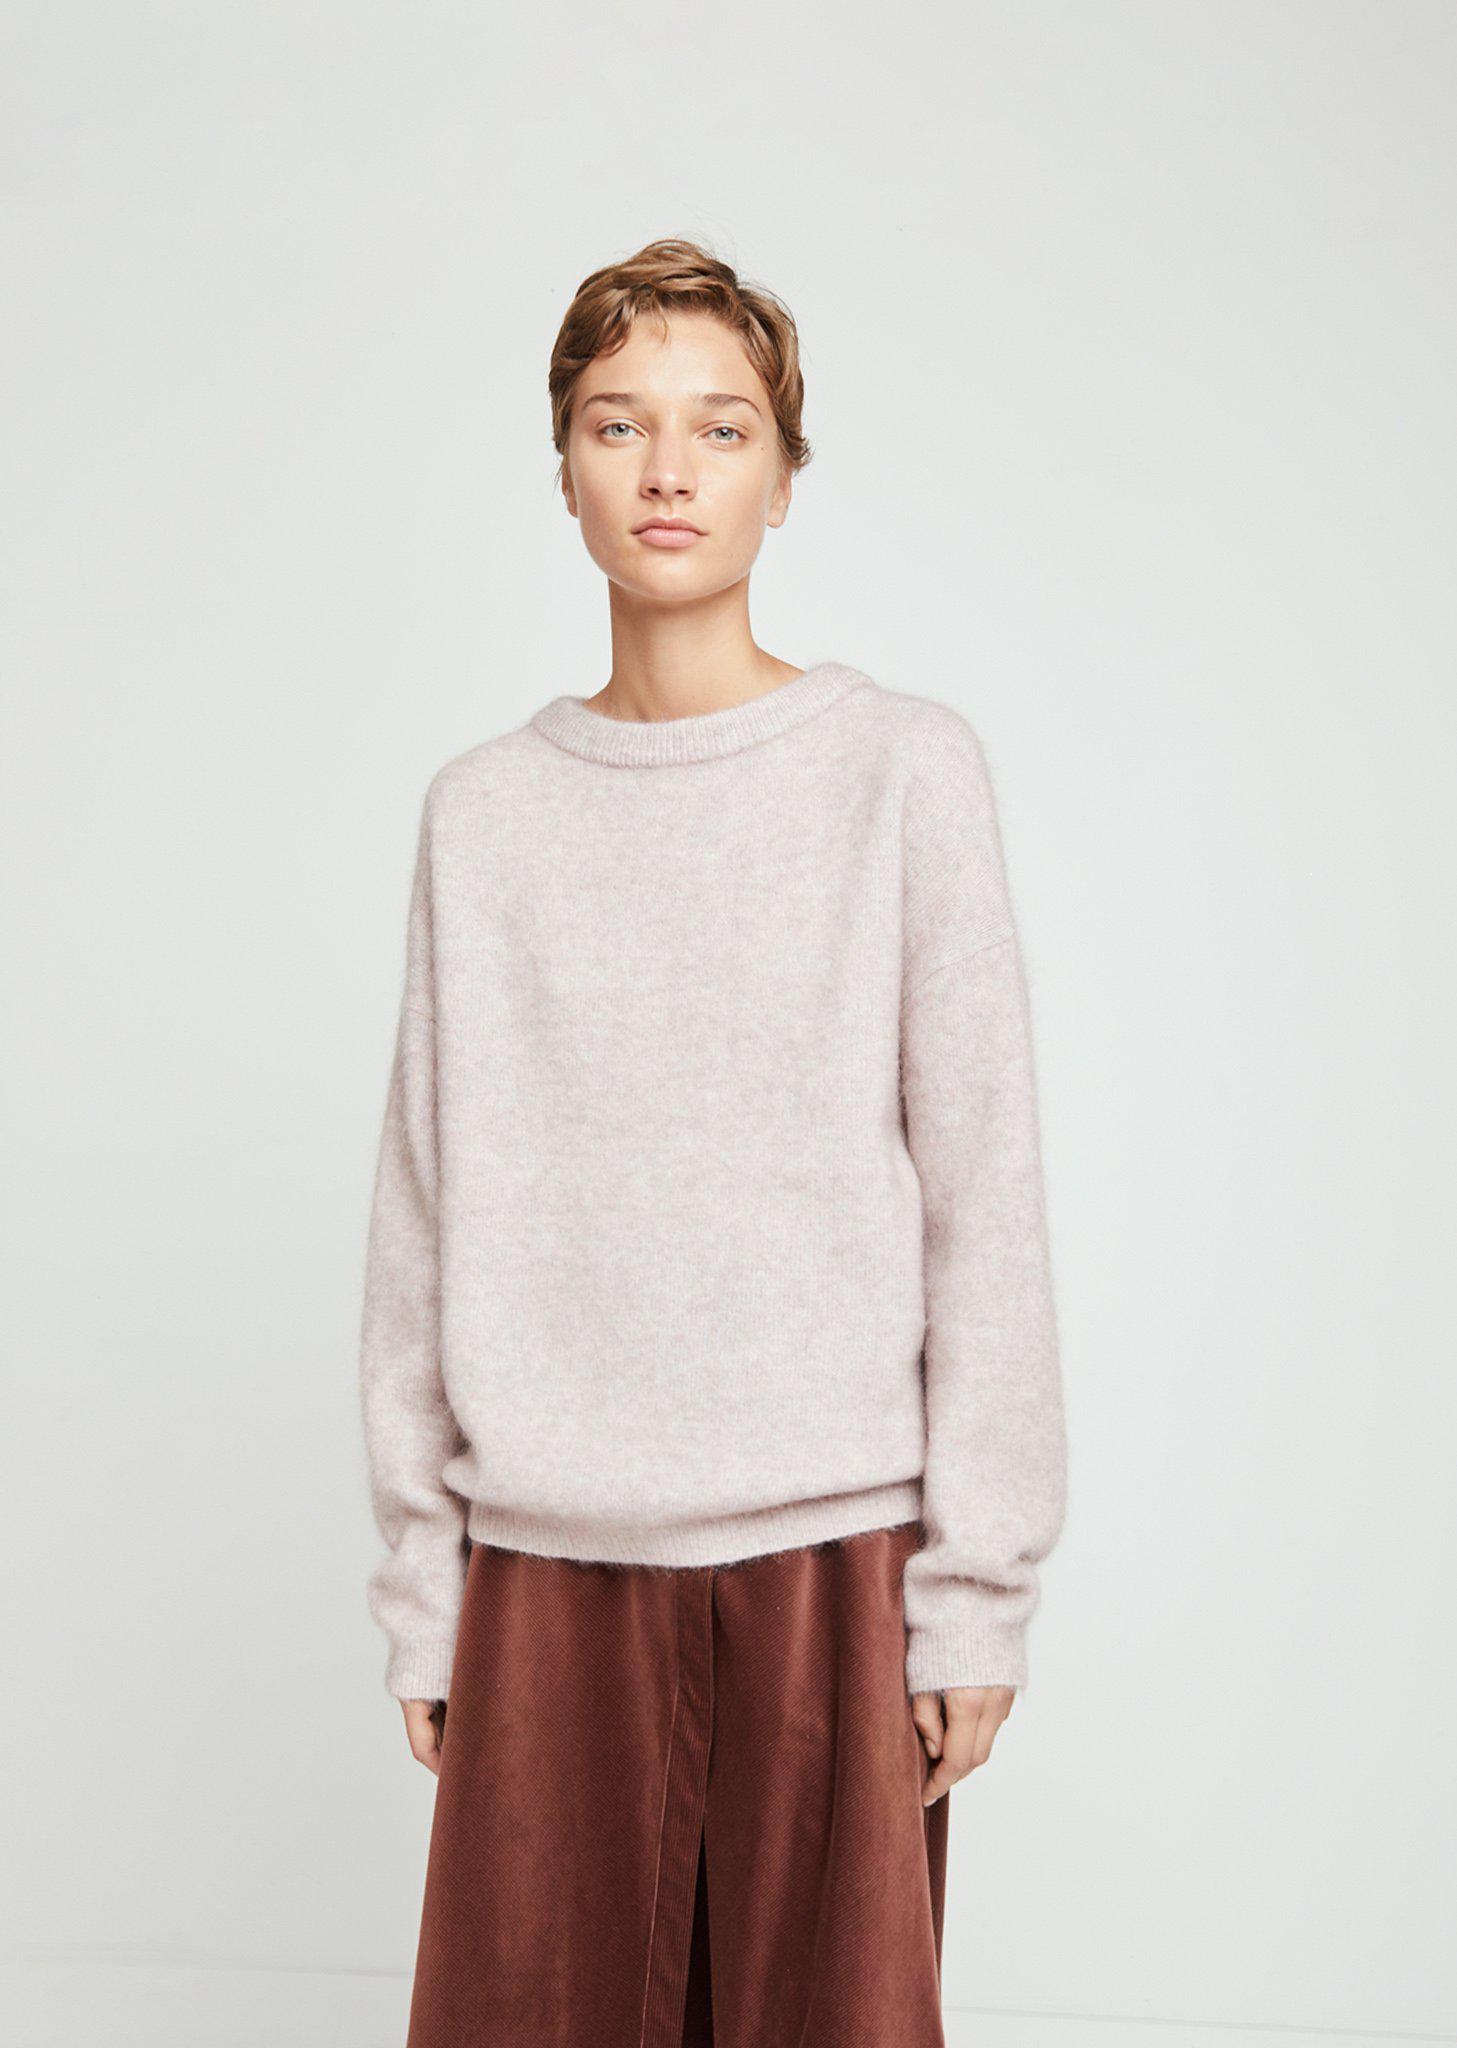 Acne Studios Wool Dramatic Mohair Sweater in Powder Pink (Pink) - Lyst